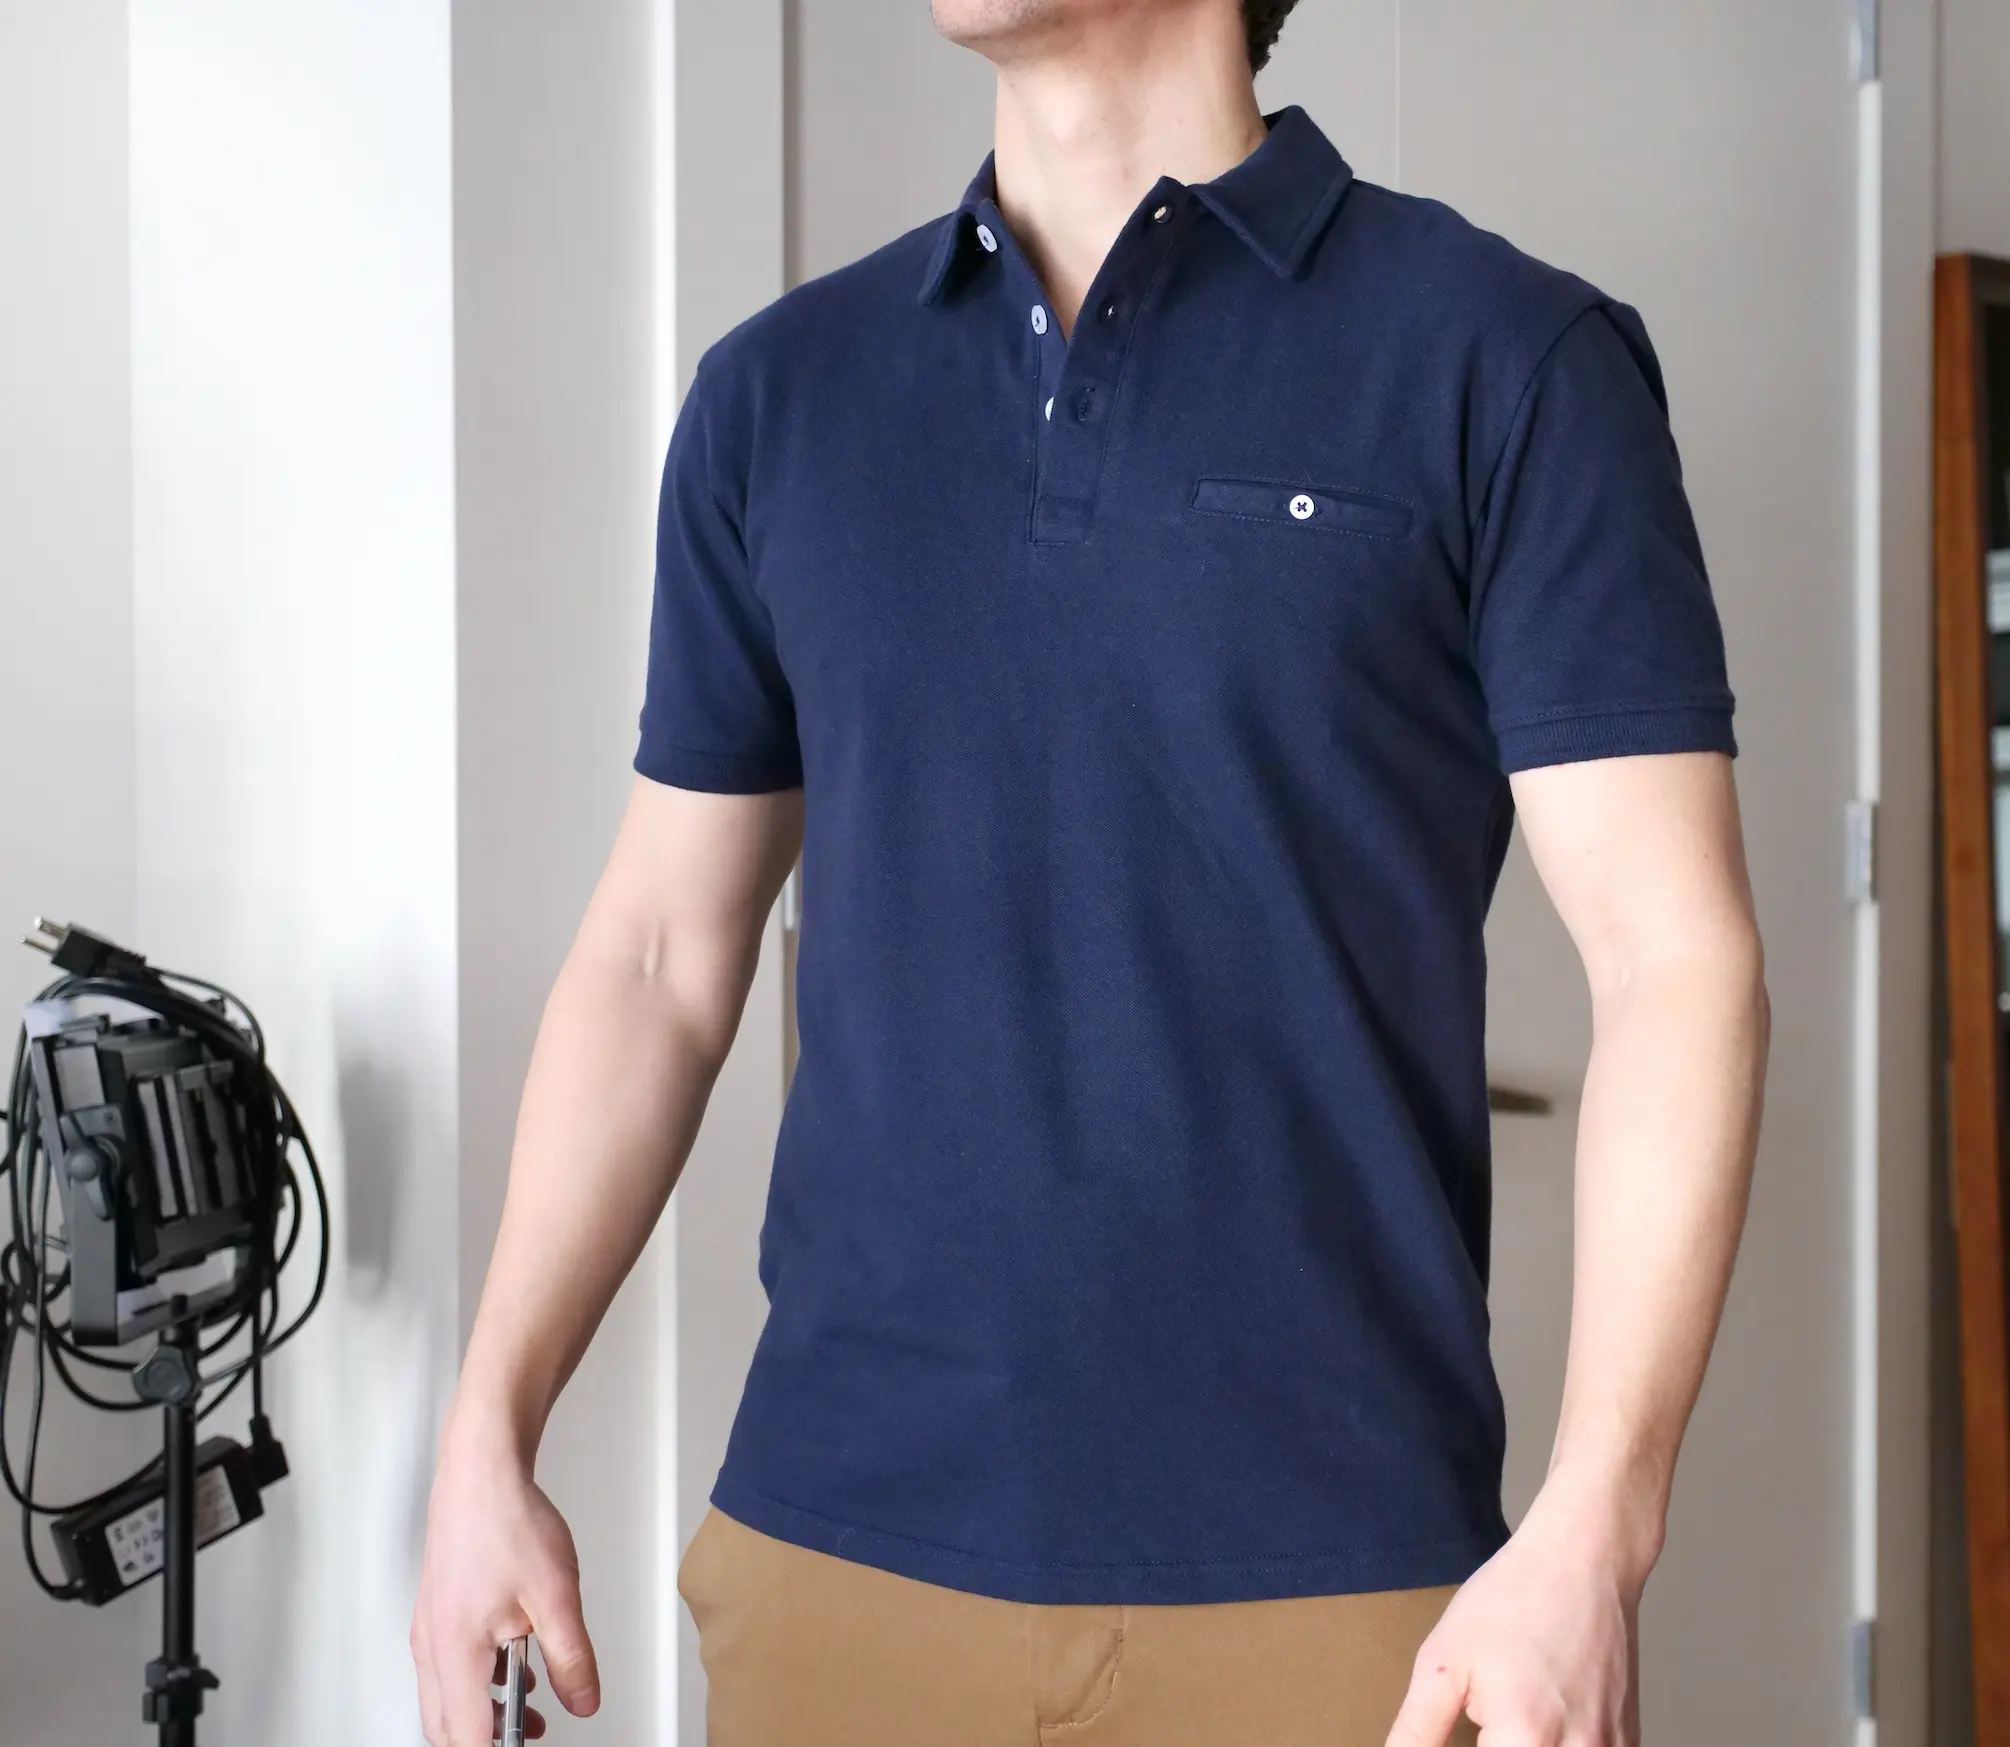 vrouwelijk buis Geheim How to Wear a Polo Shirt: 11 Outfit Ideas for Guys - The Modest Man